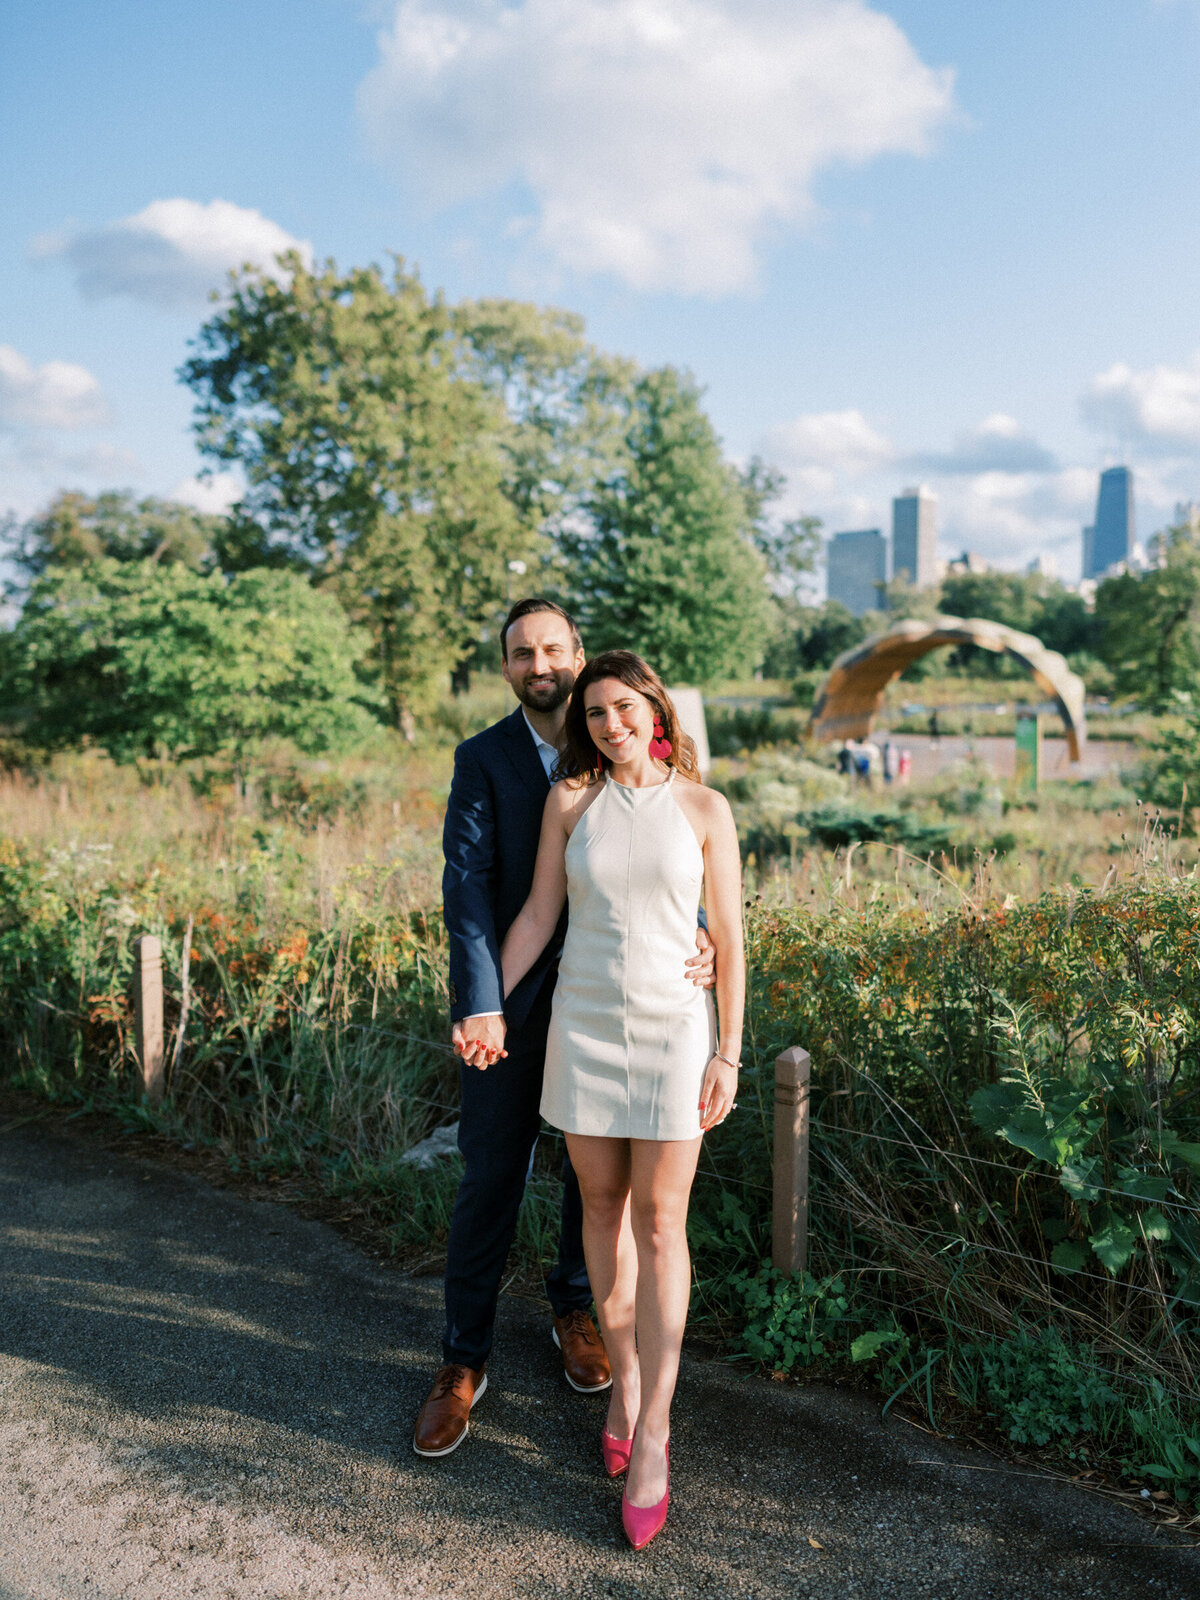 Lincoln Park Chicago Fall Engagement Session Highlights | Amarachi Ikeji Photography 01